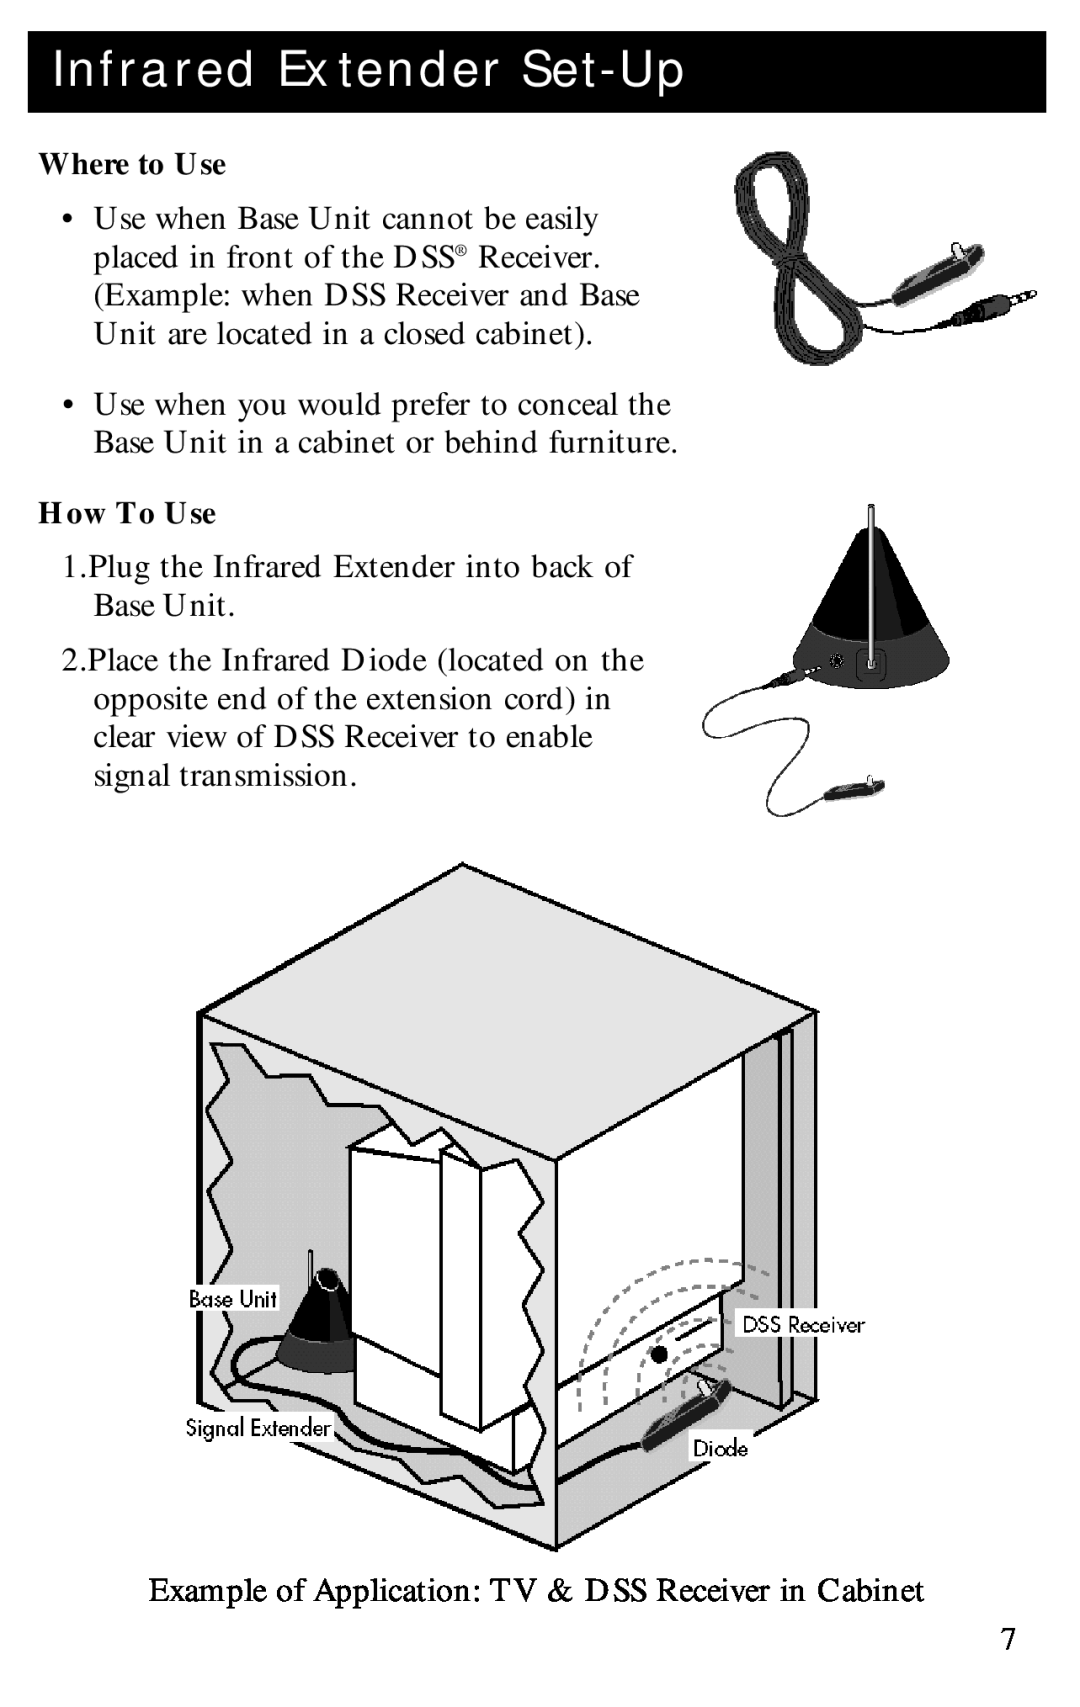 RCA D940 warranty Infrared Extender Set-Up, How To Use, Where to Use 